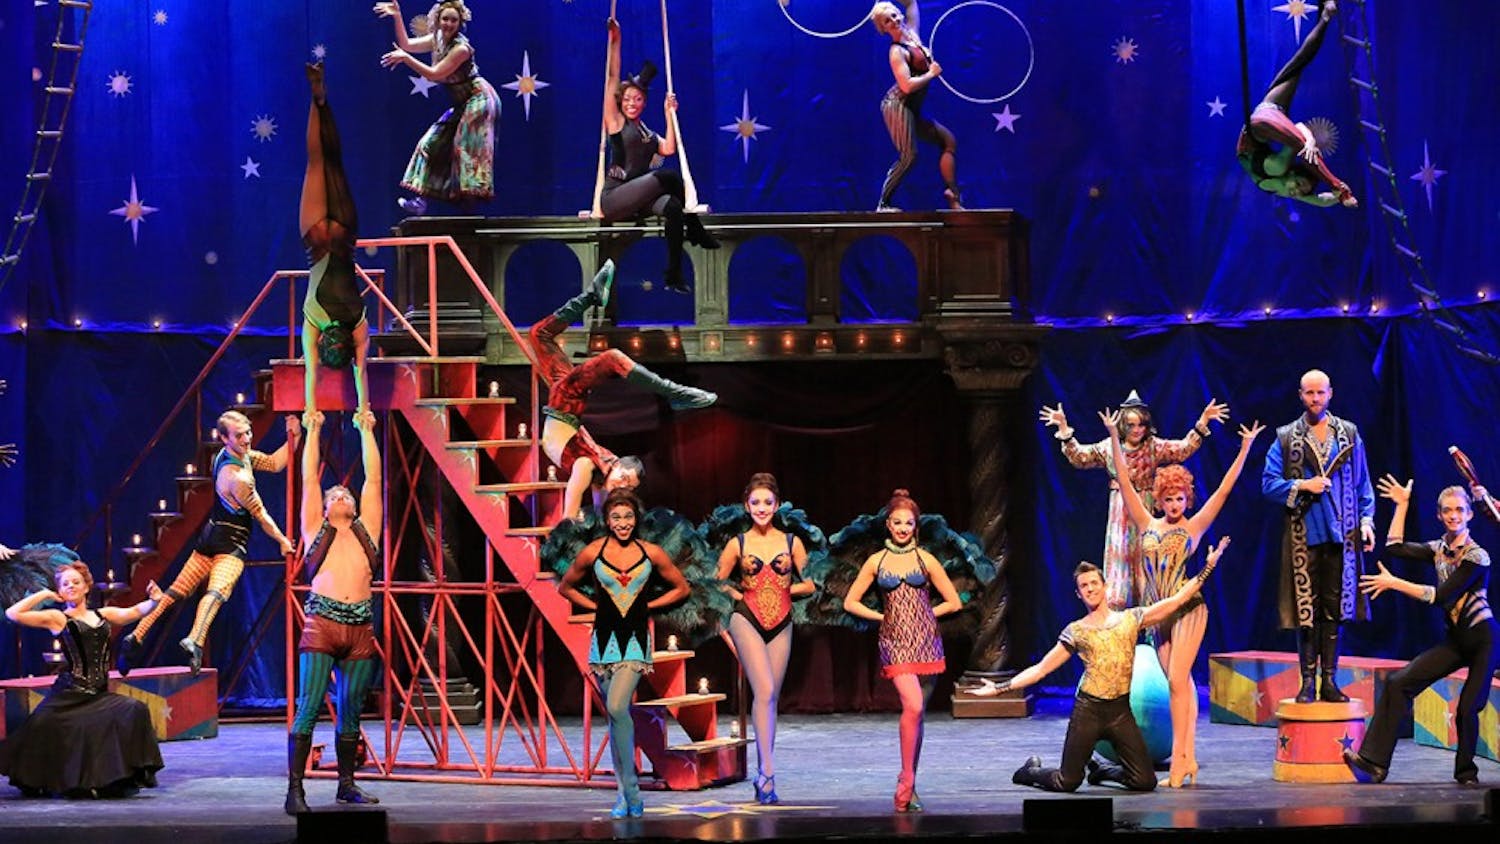 The colorful Broadway musical "Pippin" will be staged April 12 and 13 at the IU Auditorium.